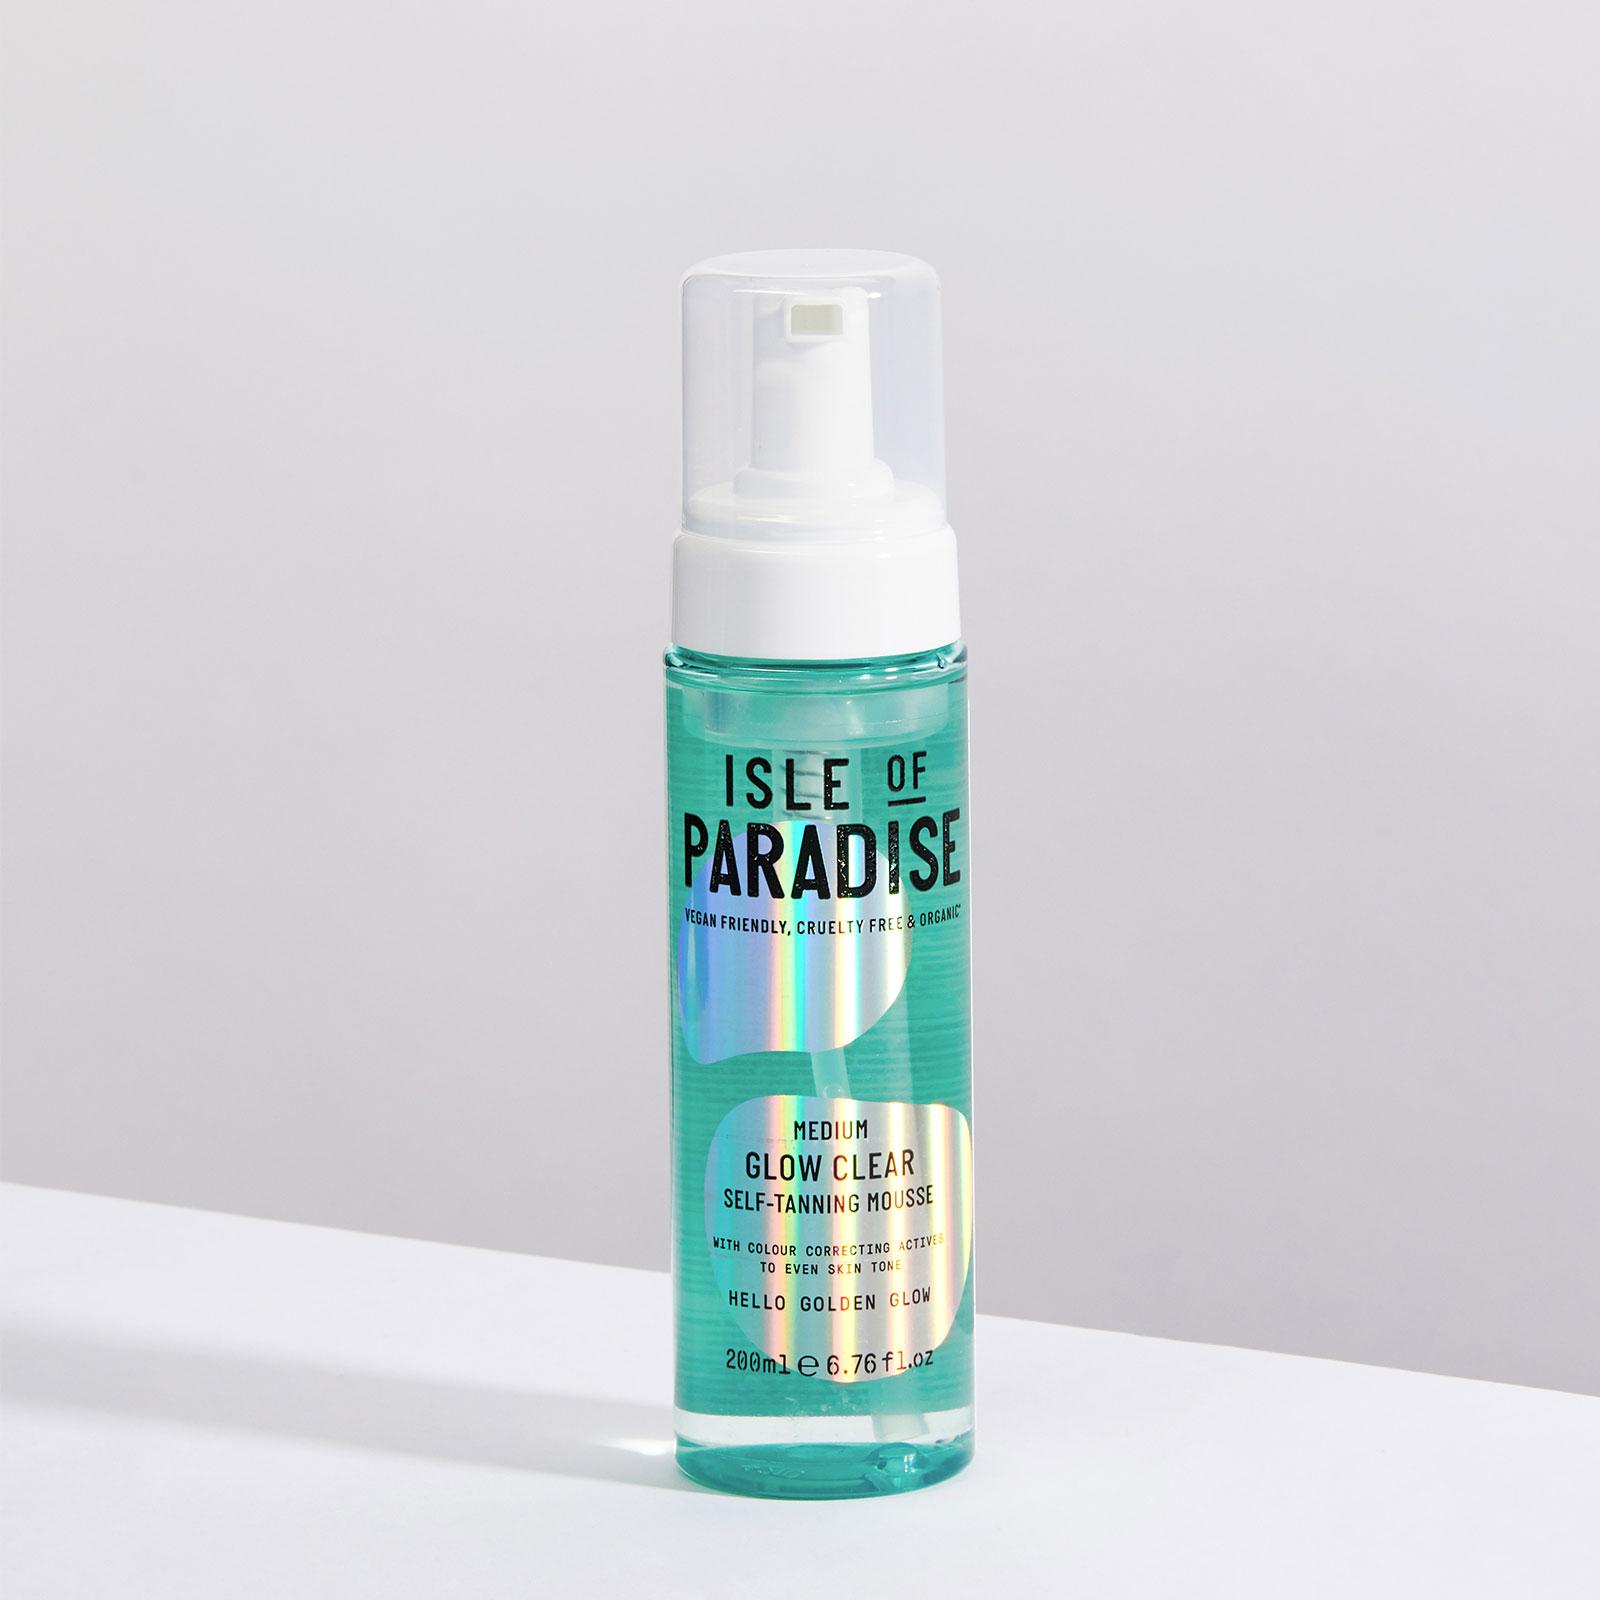 Isle of Paradise Glow Clear Self Tanning Mousse Review